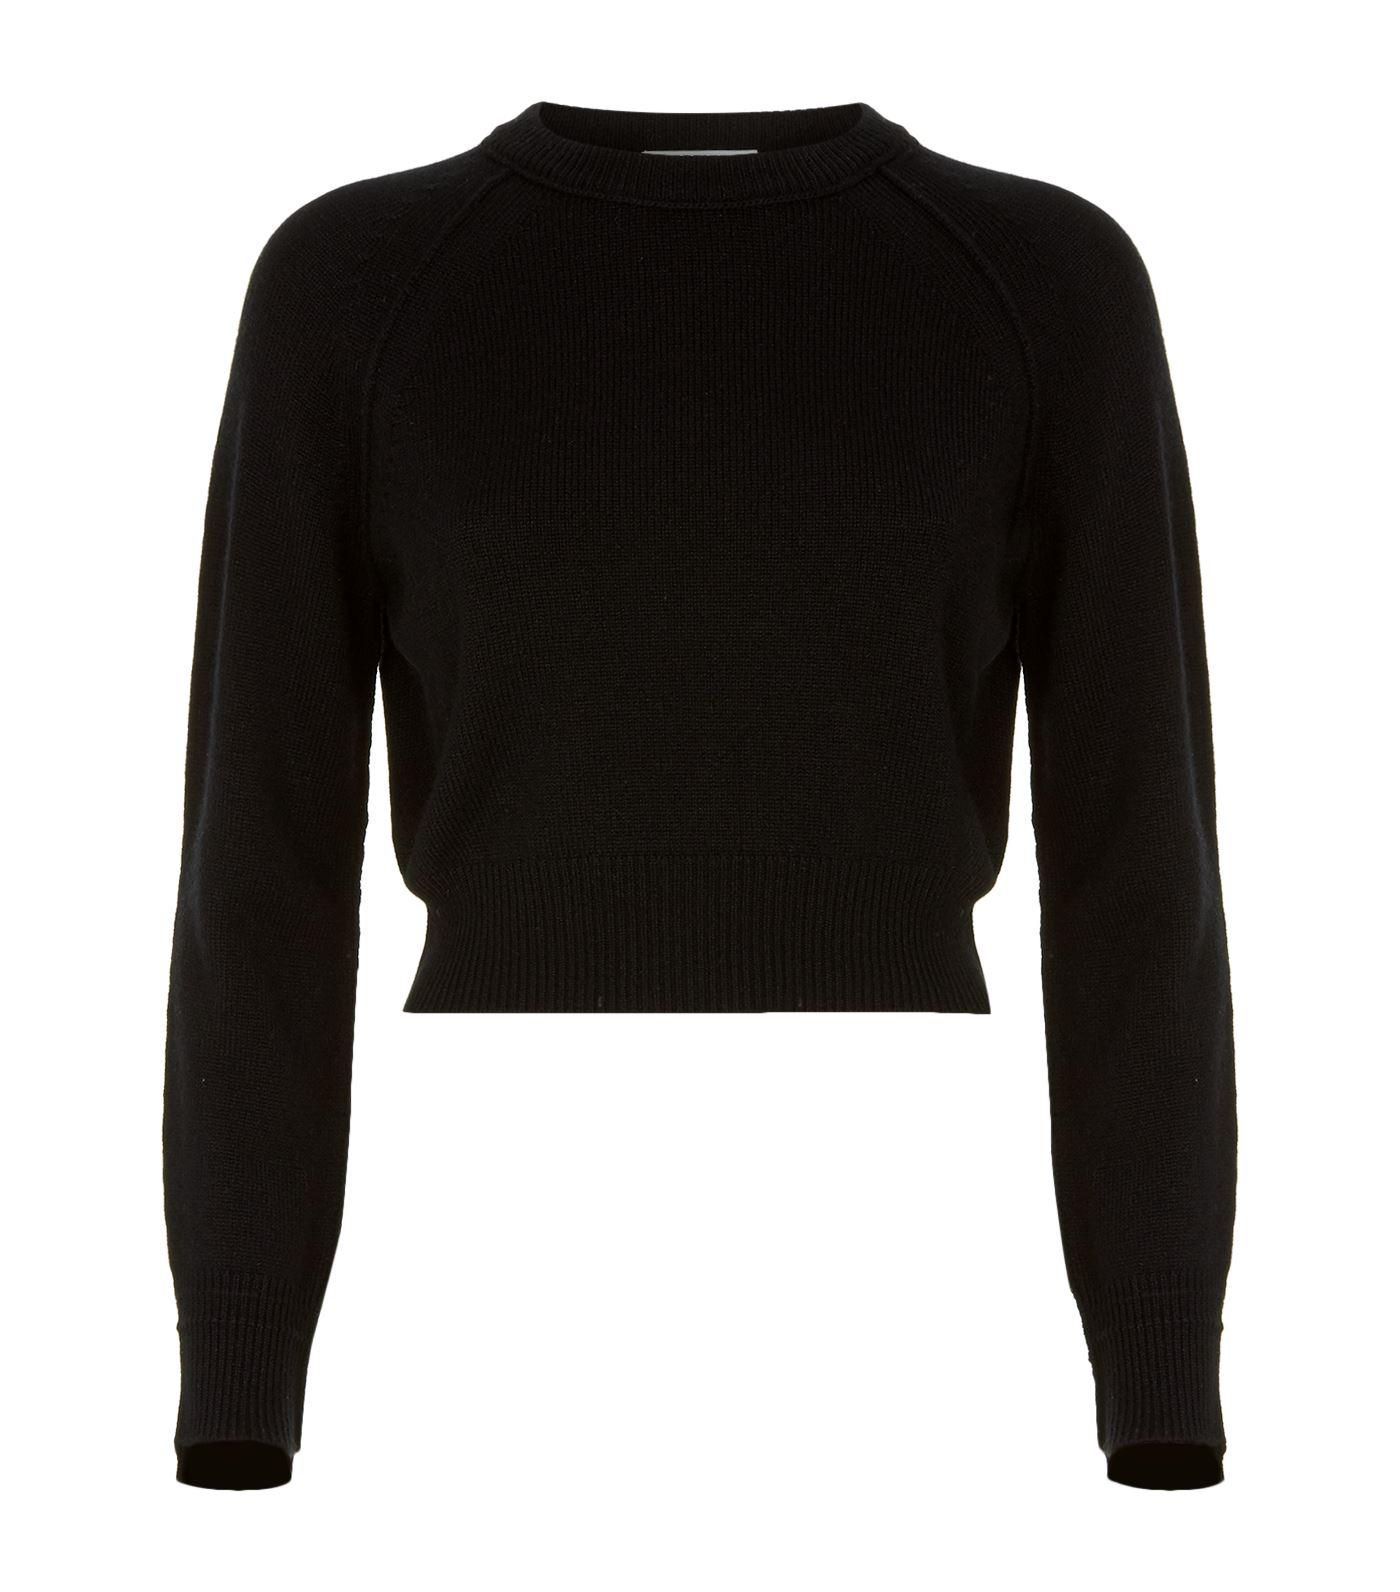 Helmut Lang Cropped Cashmere Sweater in Black | Lyst